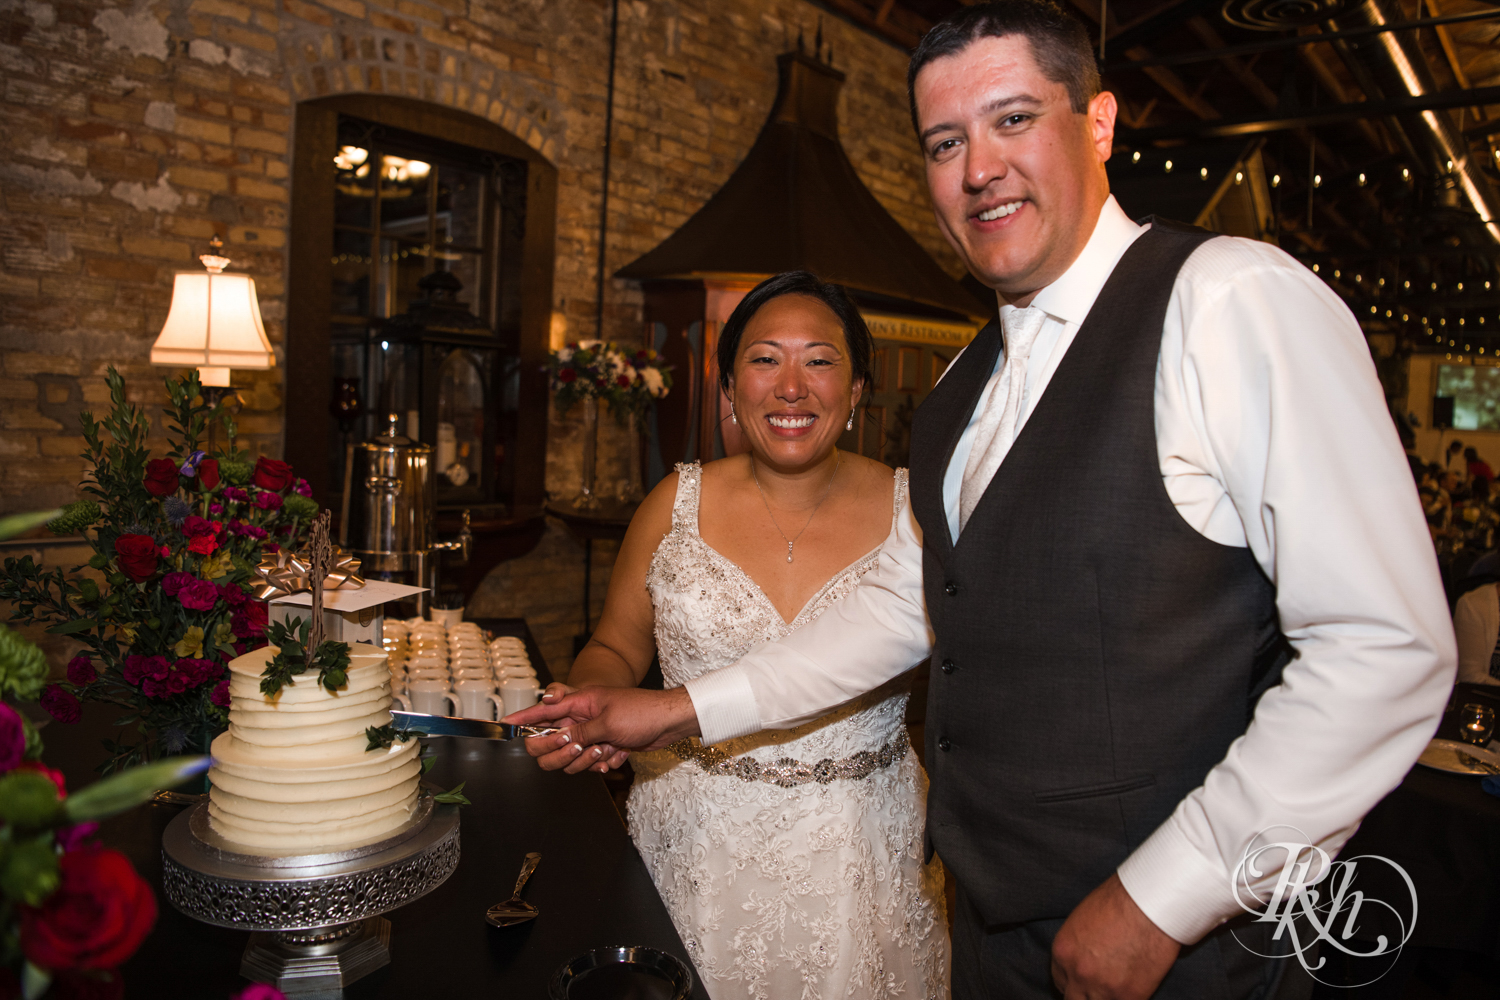 Bride and groom cut cake during wedding reception at Kellerman's Event Center in White Bear Lake, Minnesota.